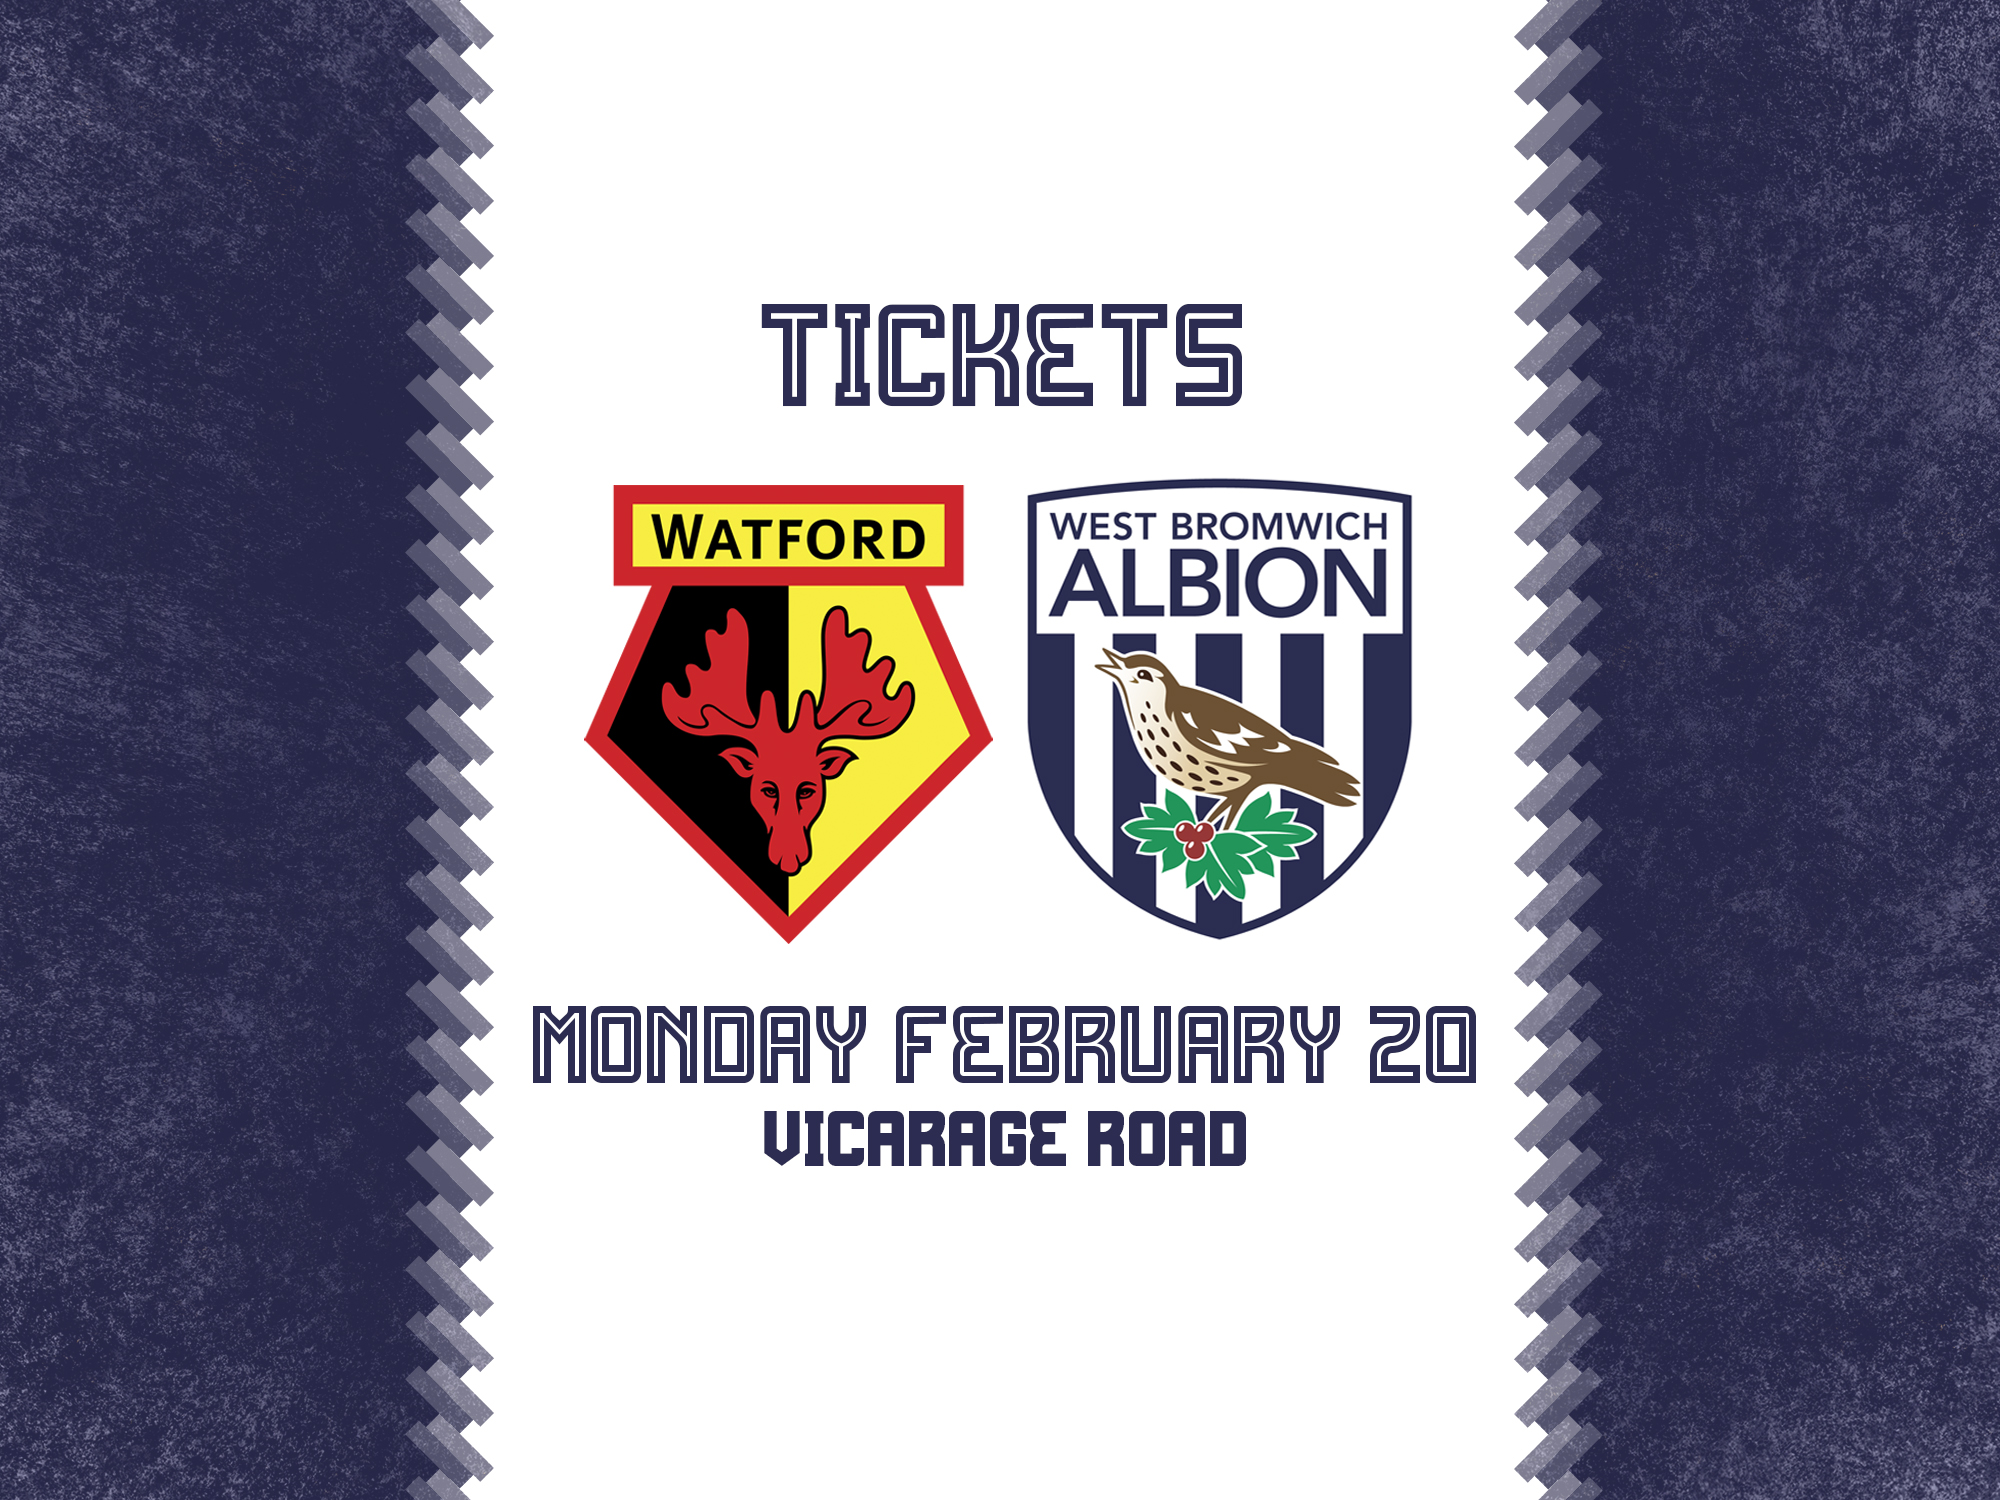 A ticket graphic for Albion's trip to Watford